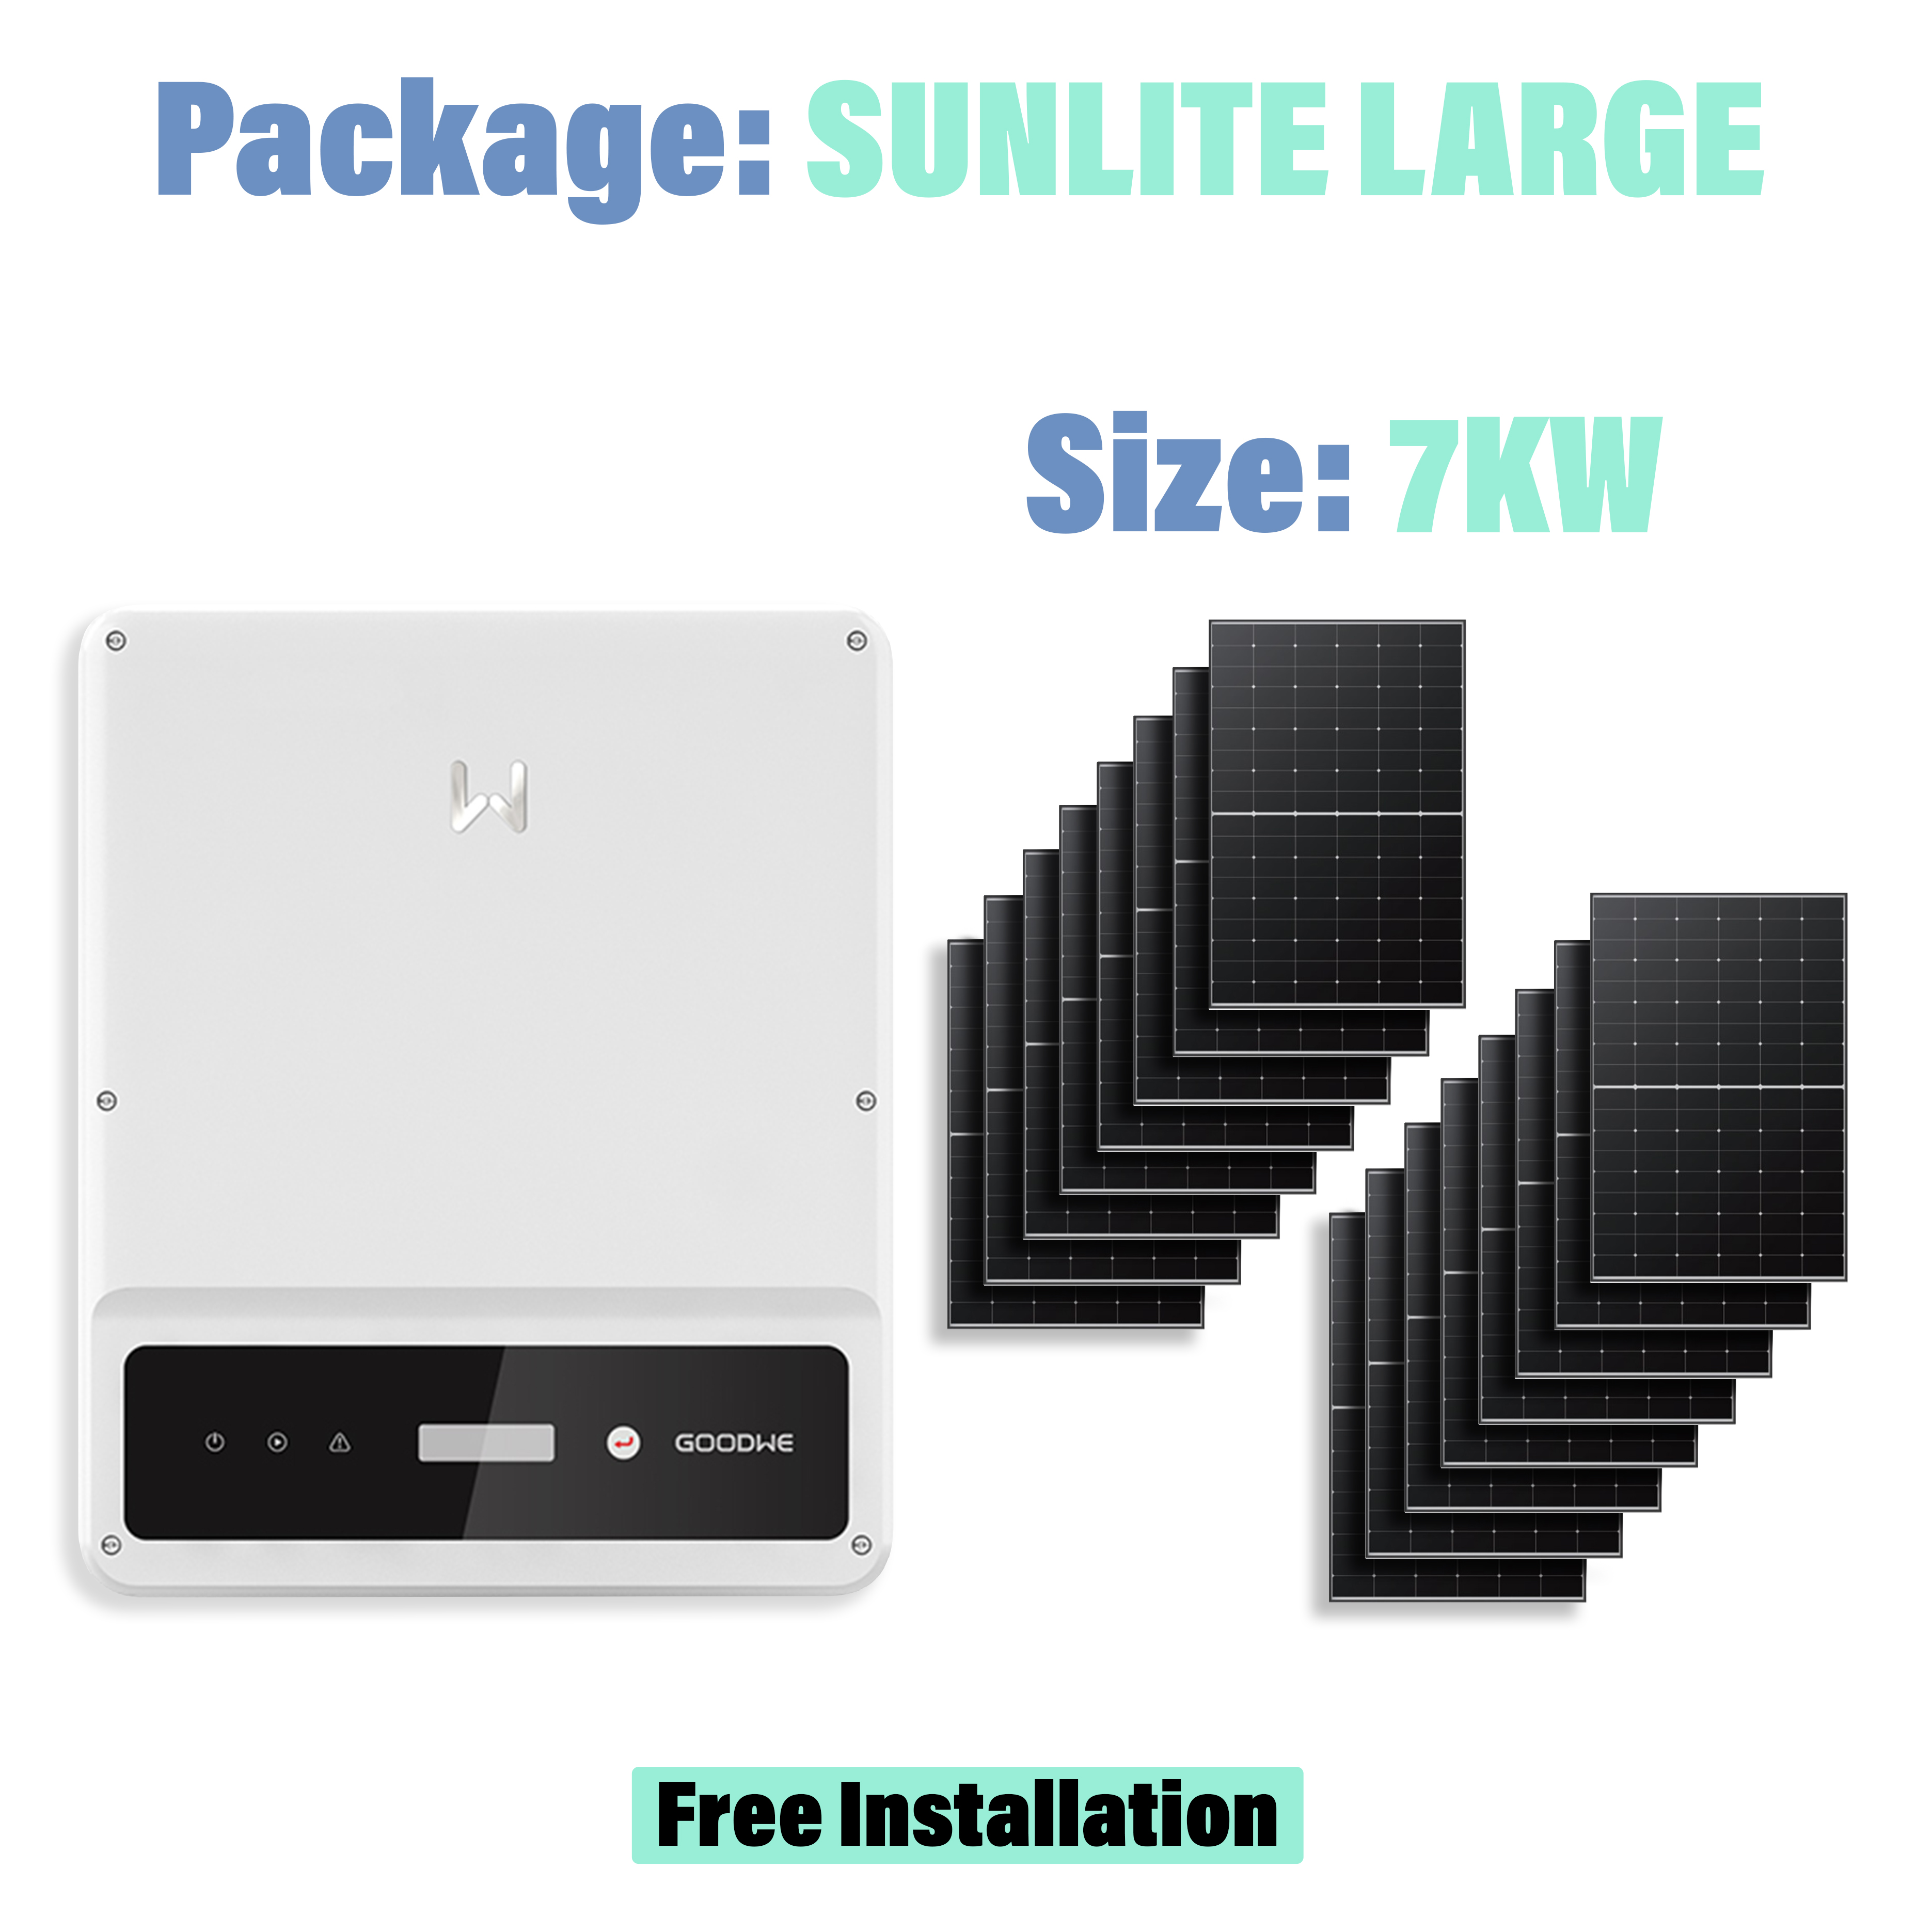 The SunLite 7kwh Package